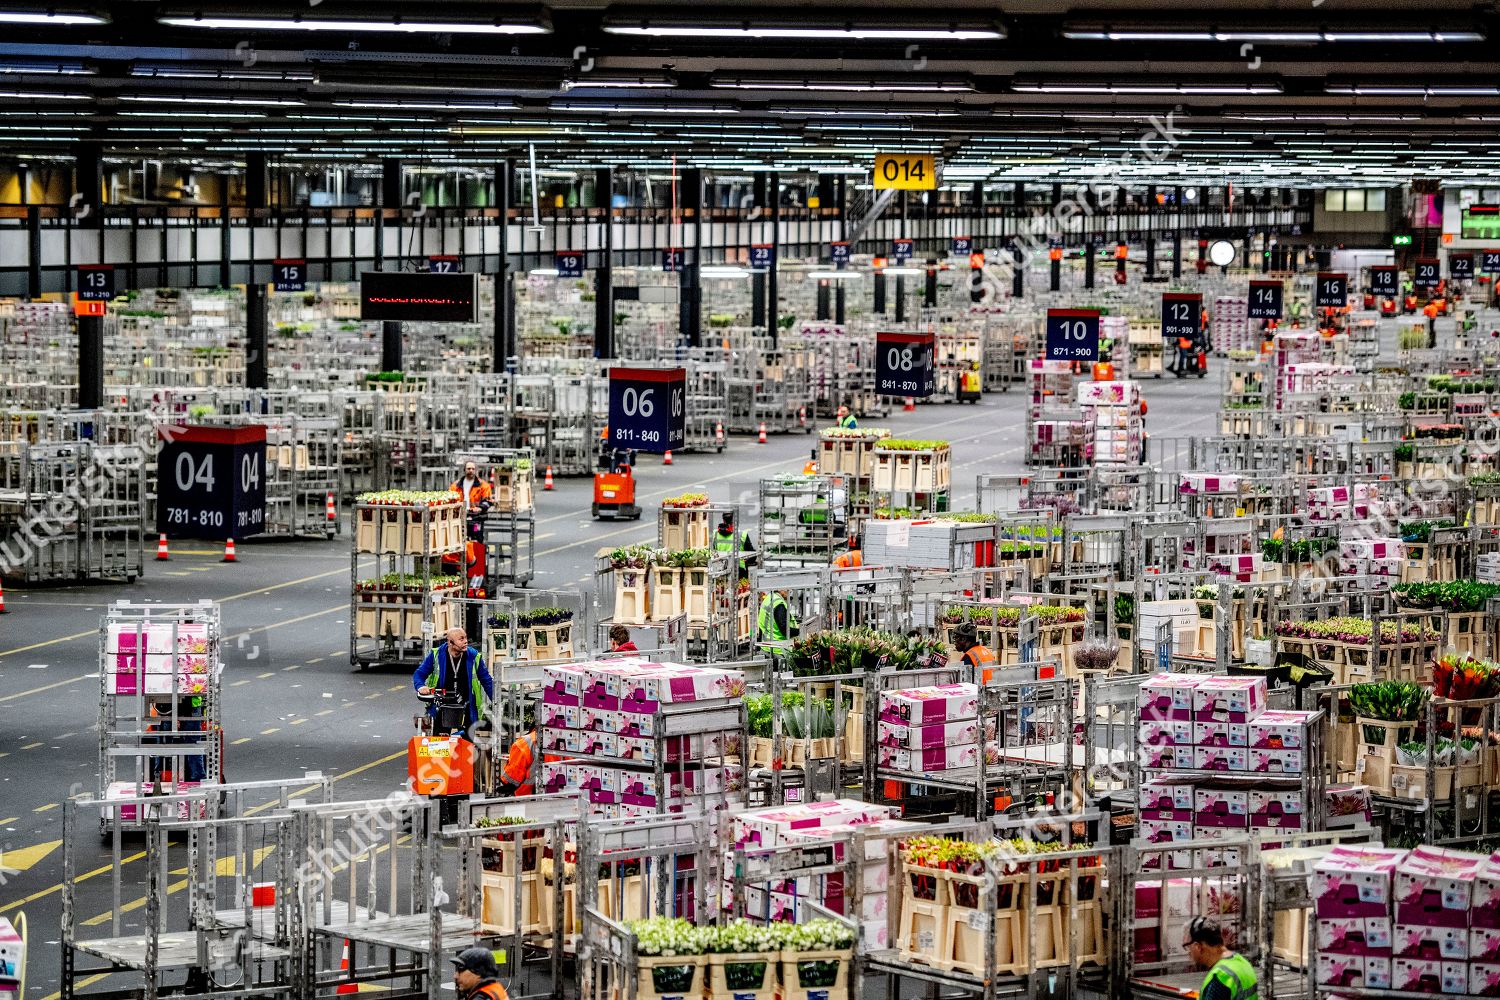 Royal Floraholland flower auction Editorial Stock Photo - Stock Image |  Shutterstock